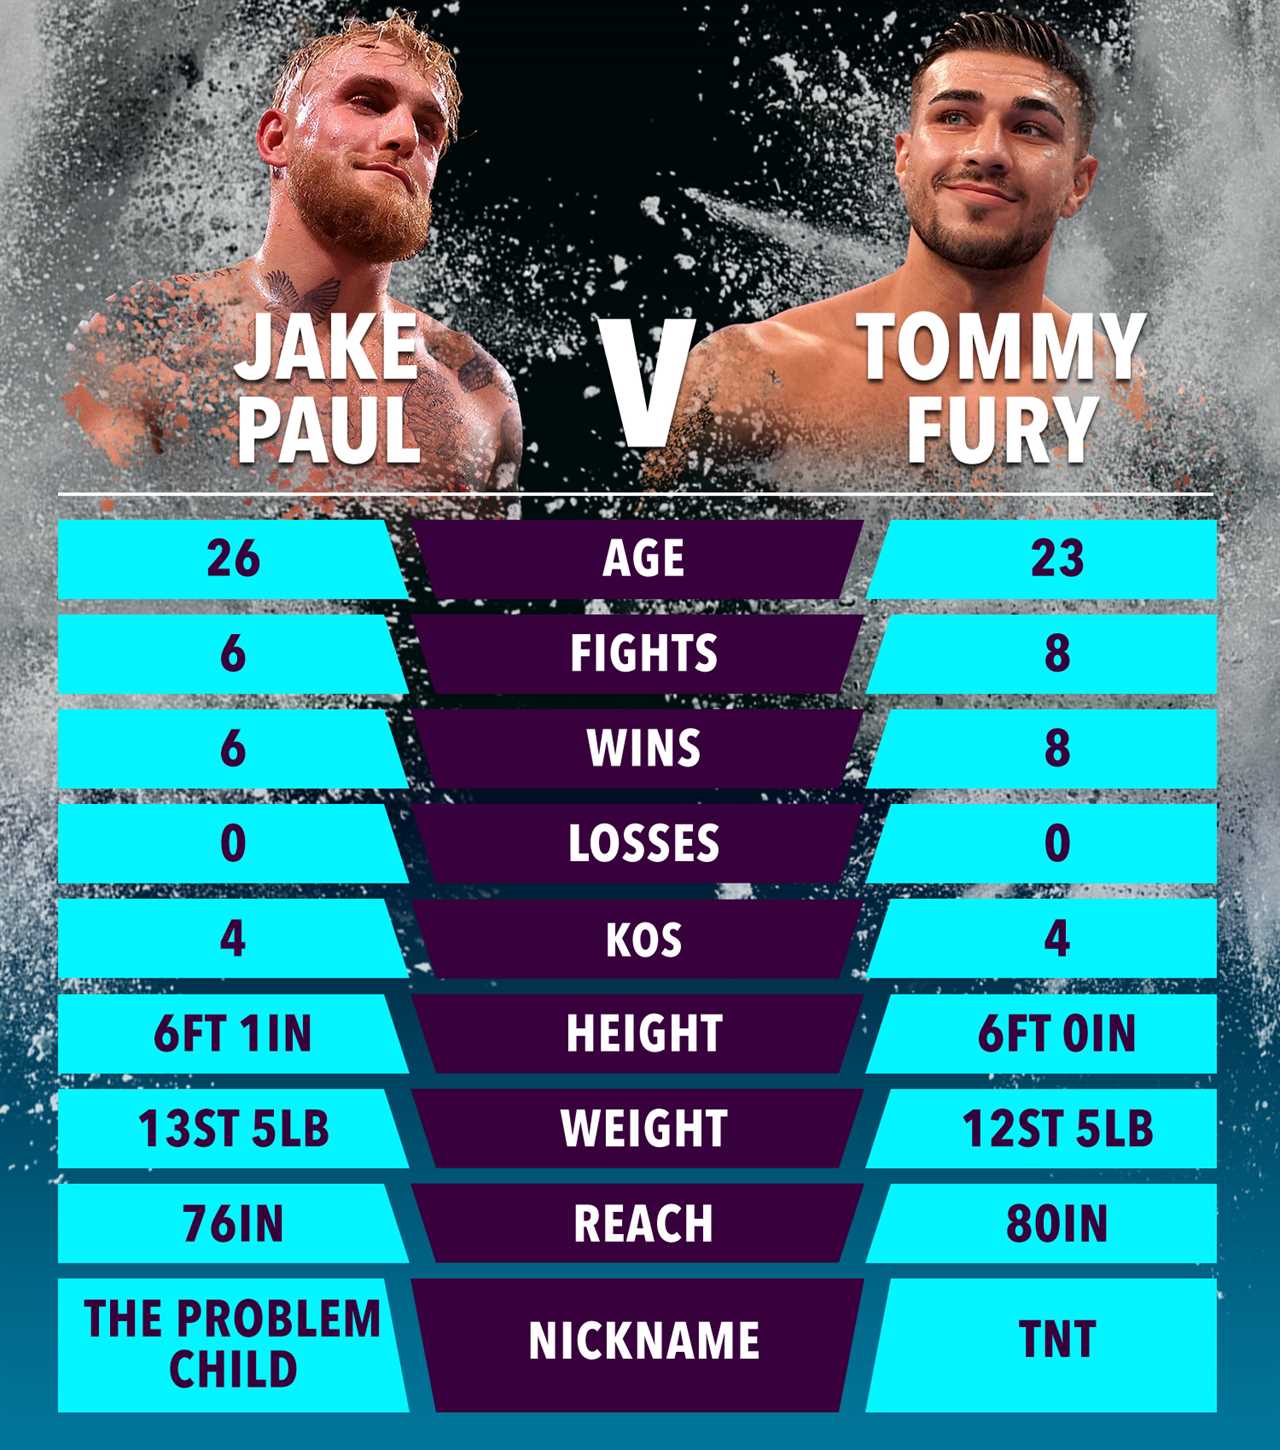 Shane Mosley, an ex-coach, urges Jake Paul to fight Tommy Fury if he wins.